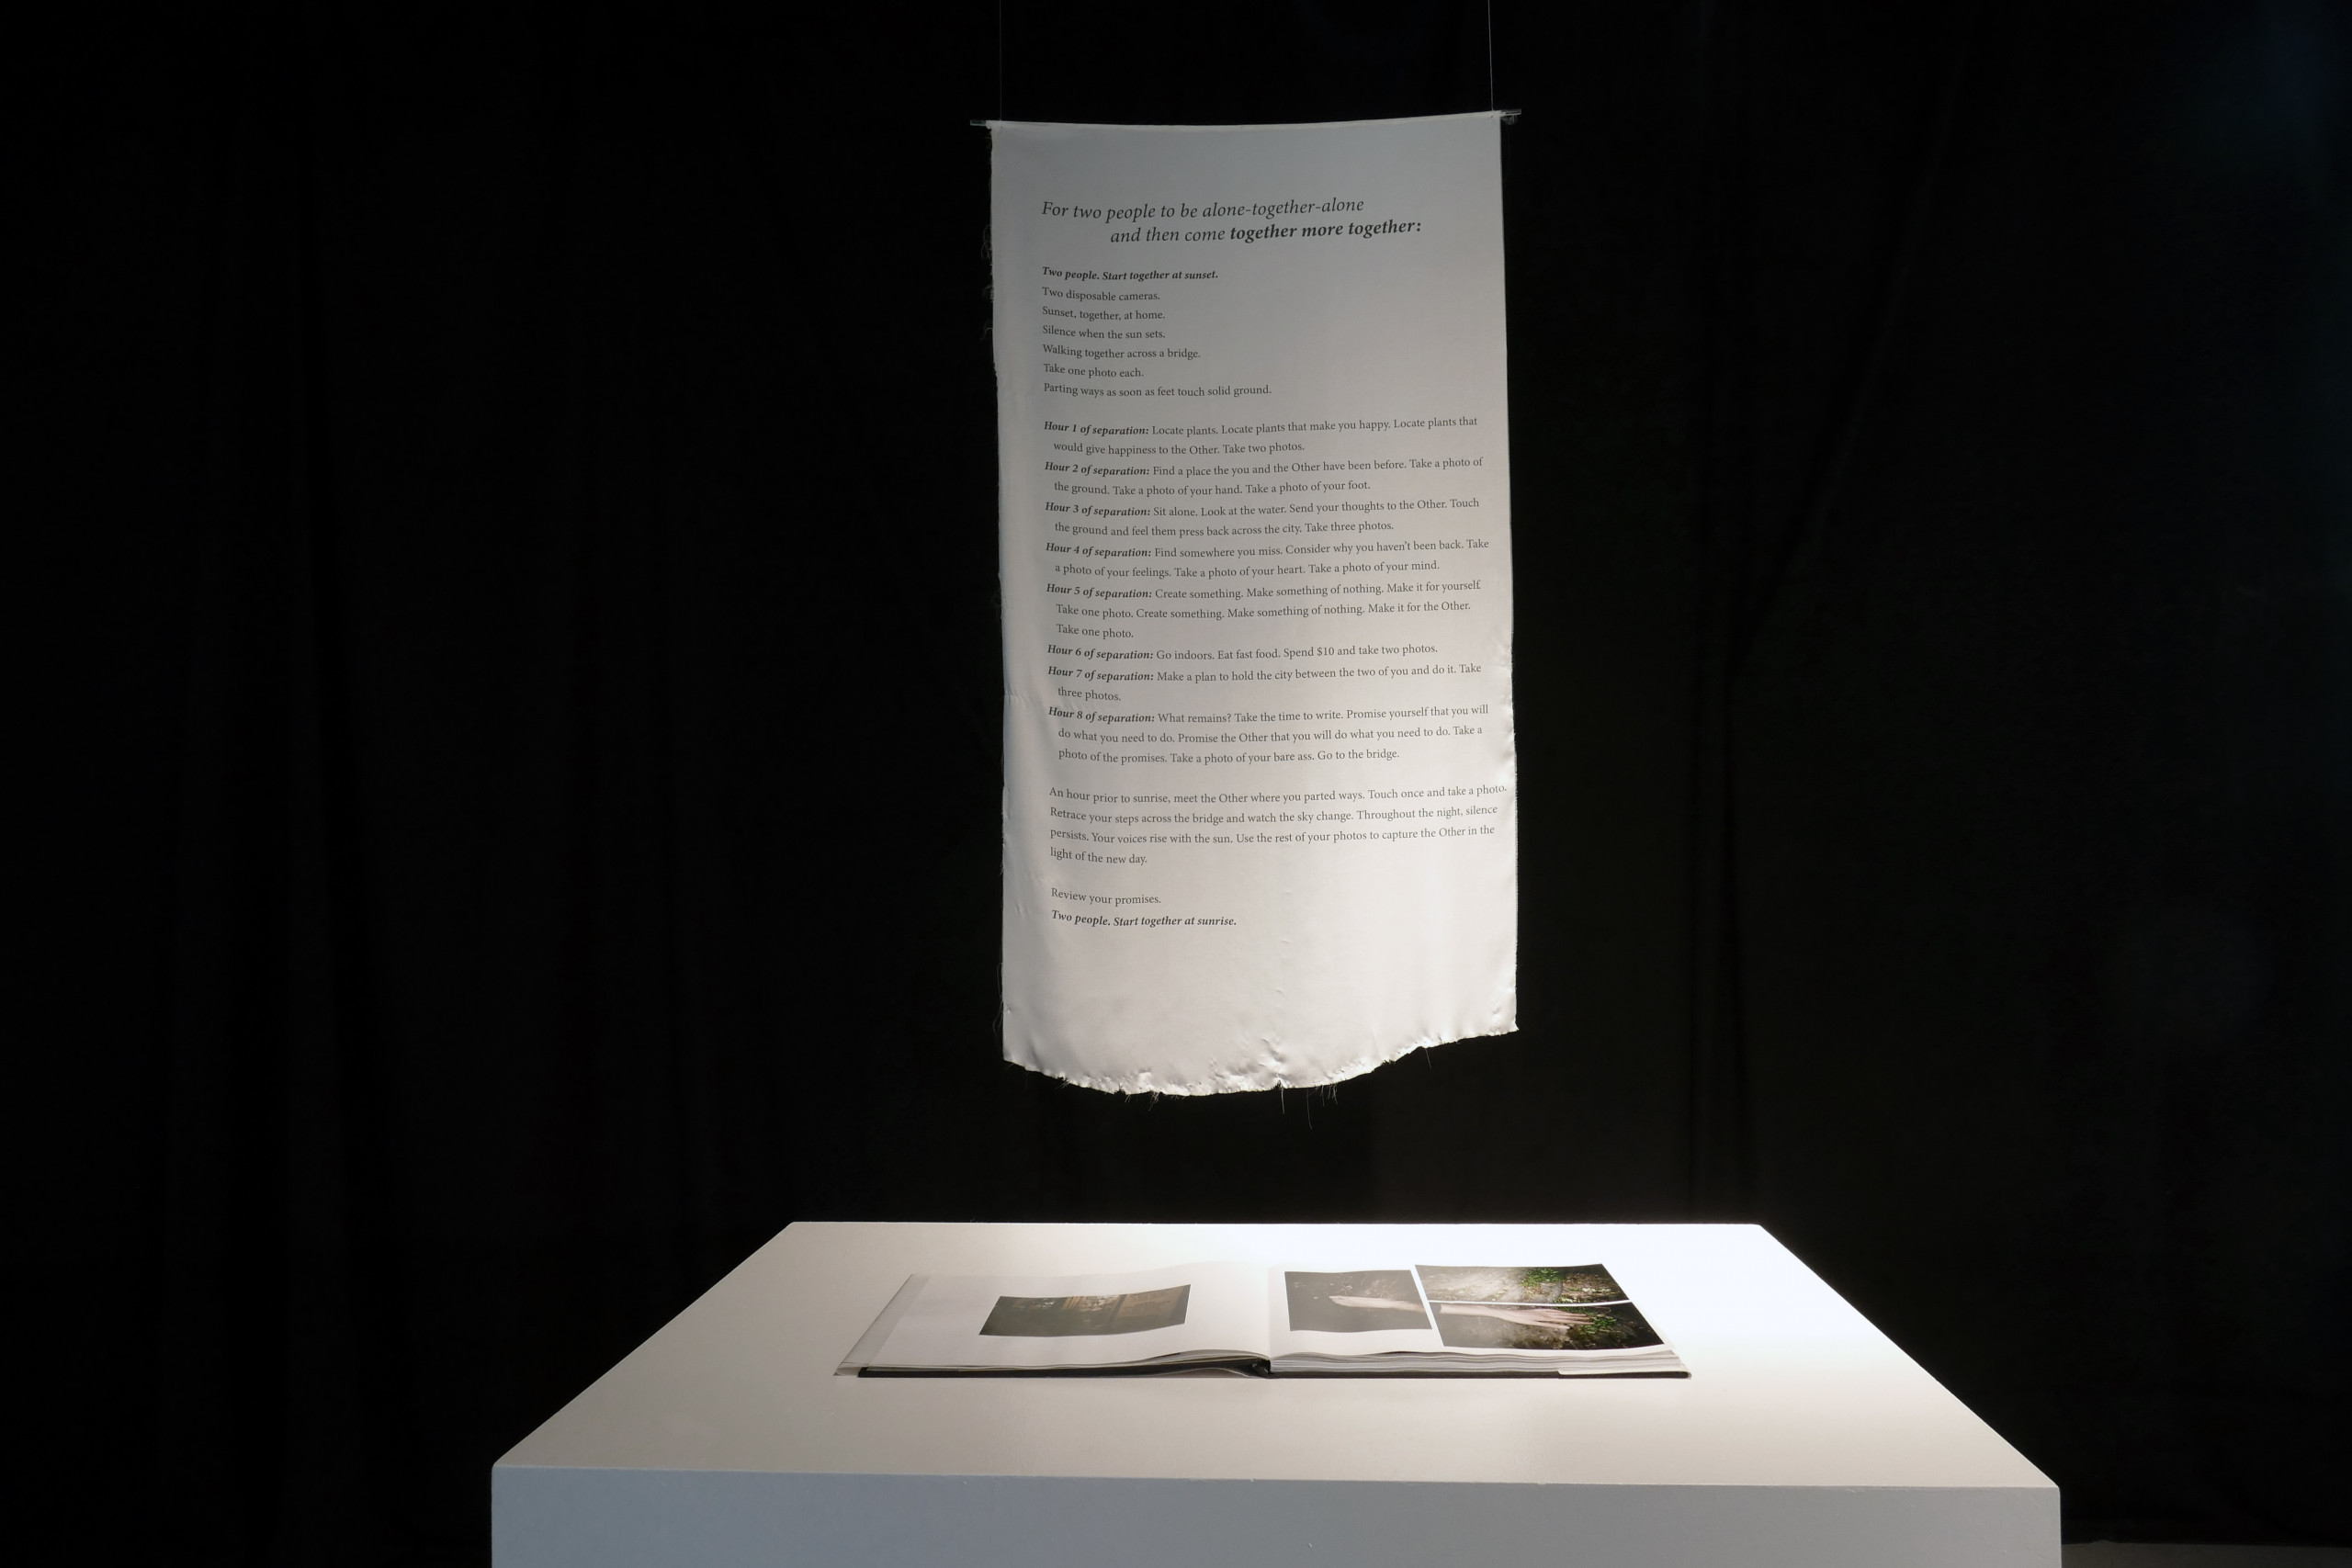 White scroll with text hangs above a white table with open photo book